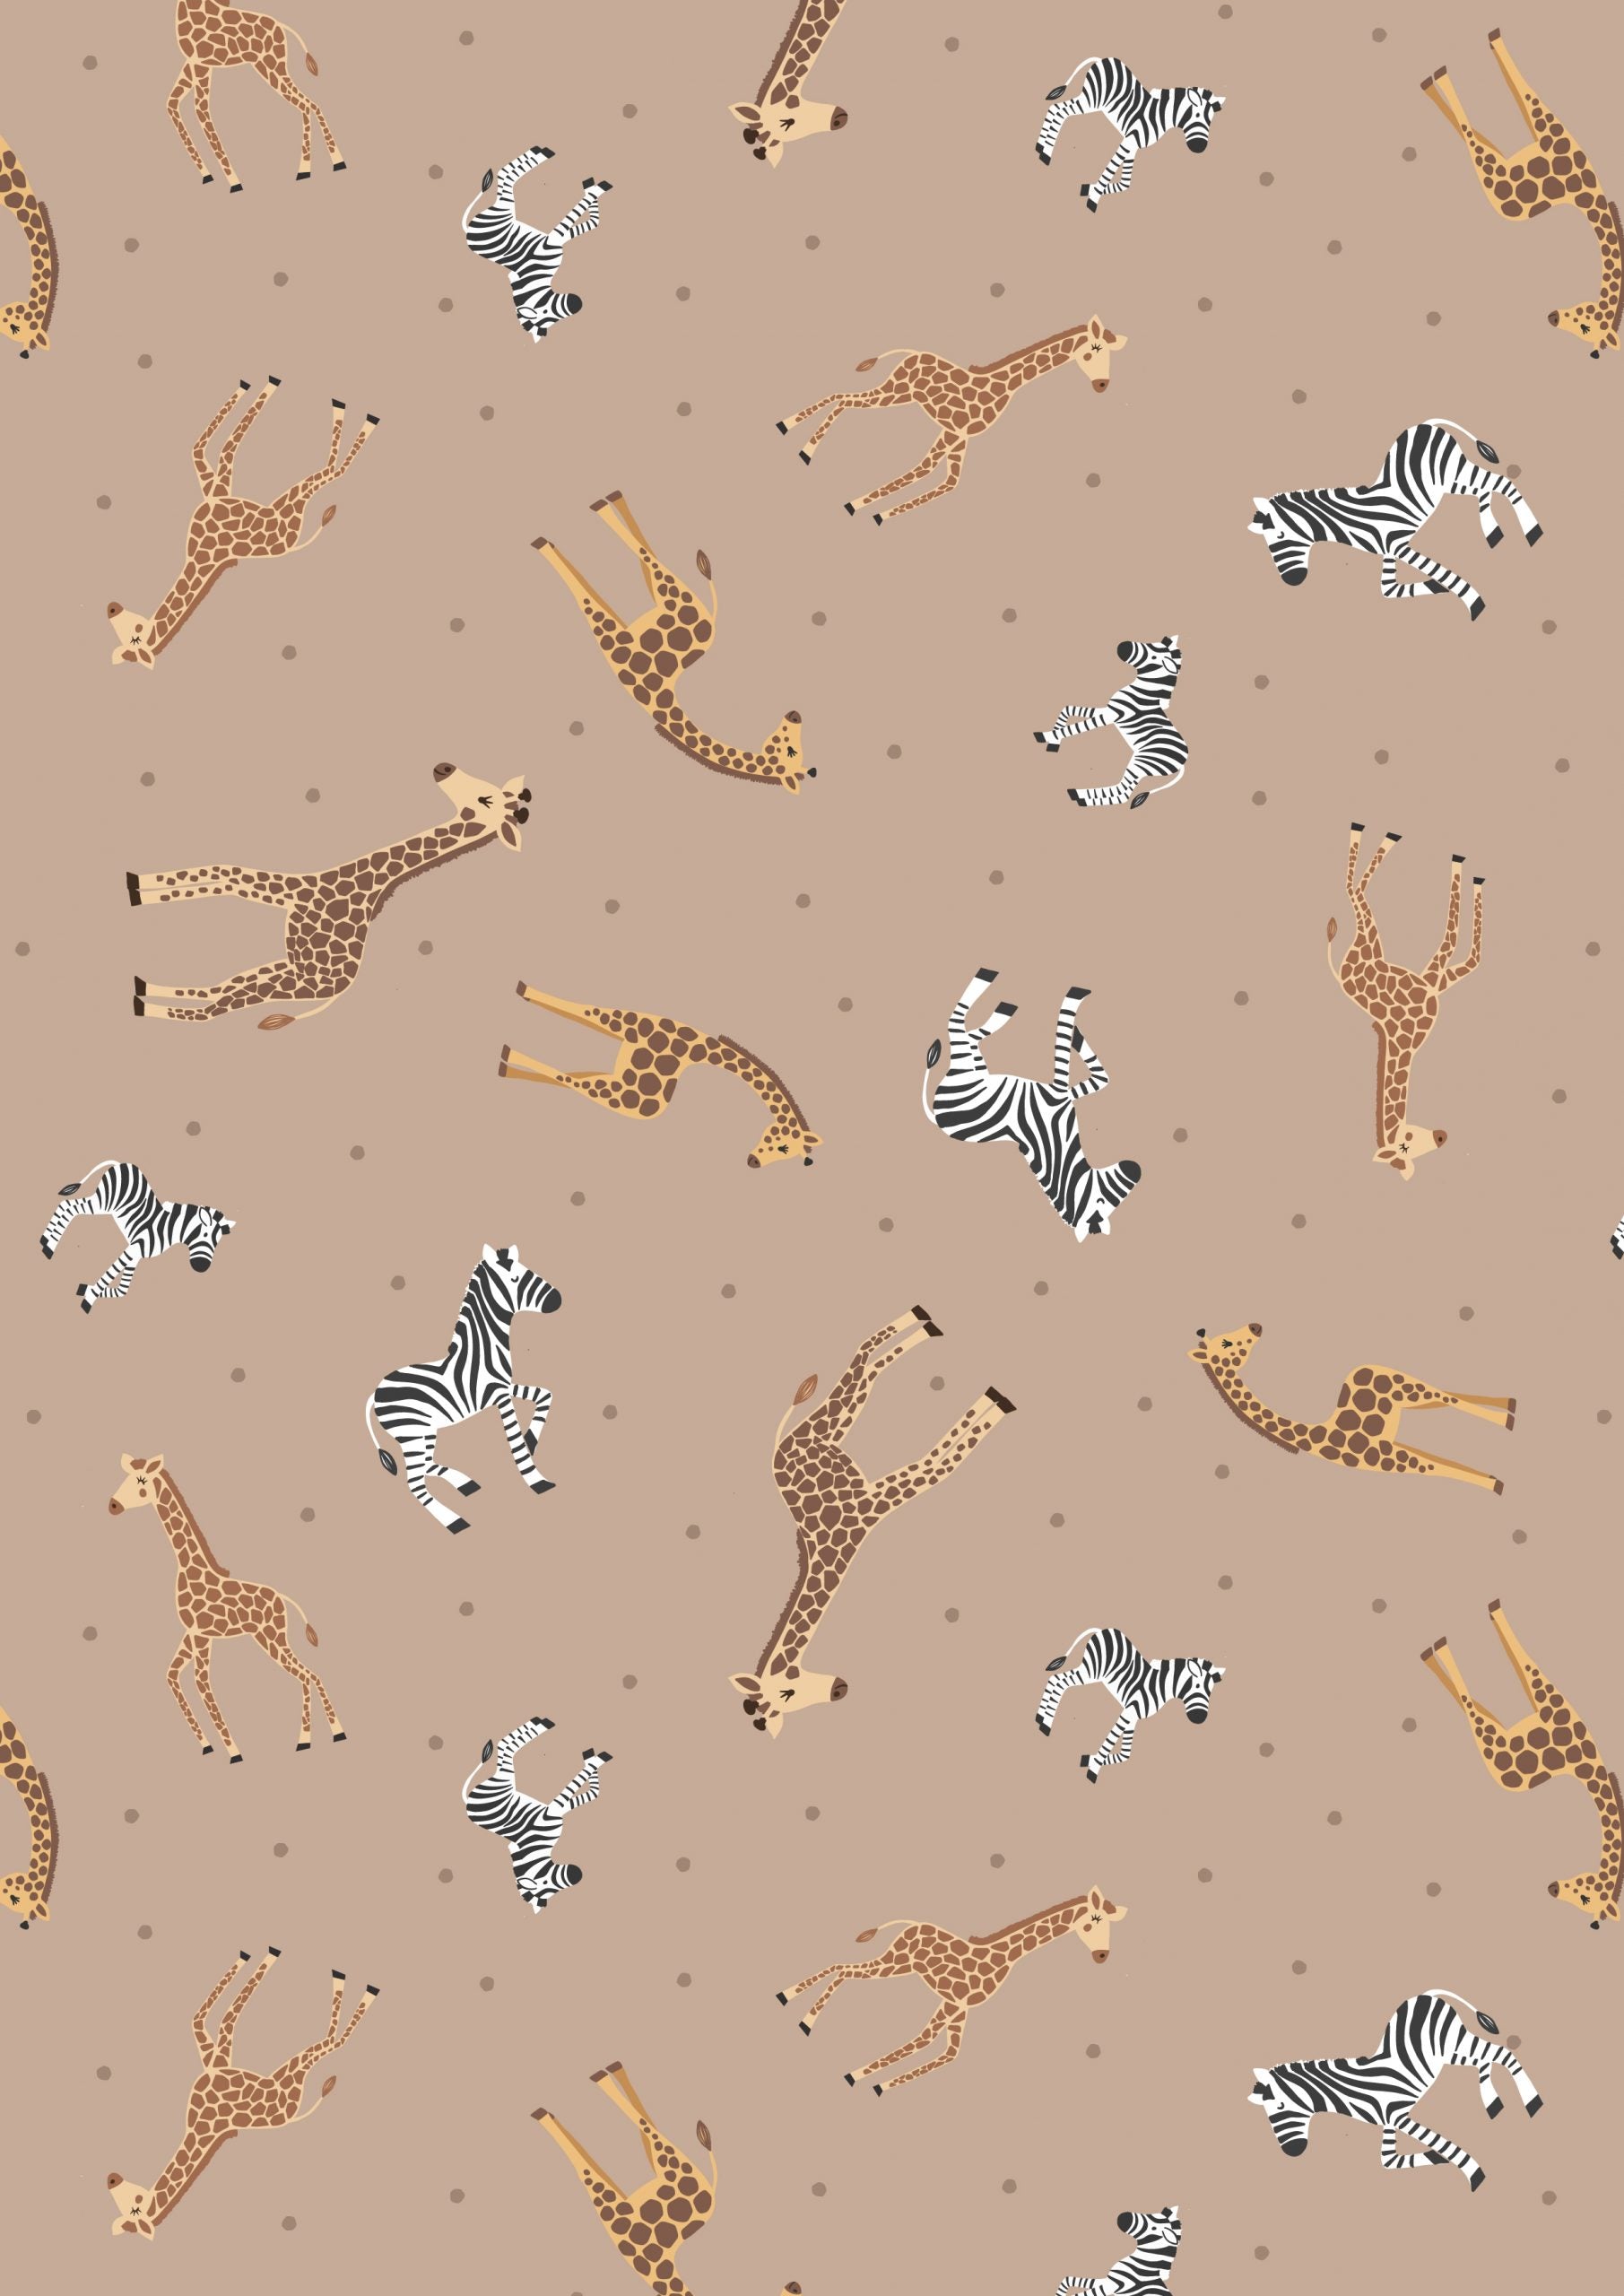 Small Things Wild Animals Quilt Fabric - Giraffes and Zebras in Biscuit Tan - SM57.2